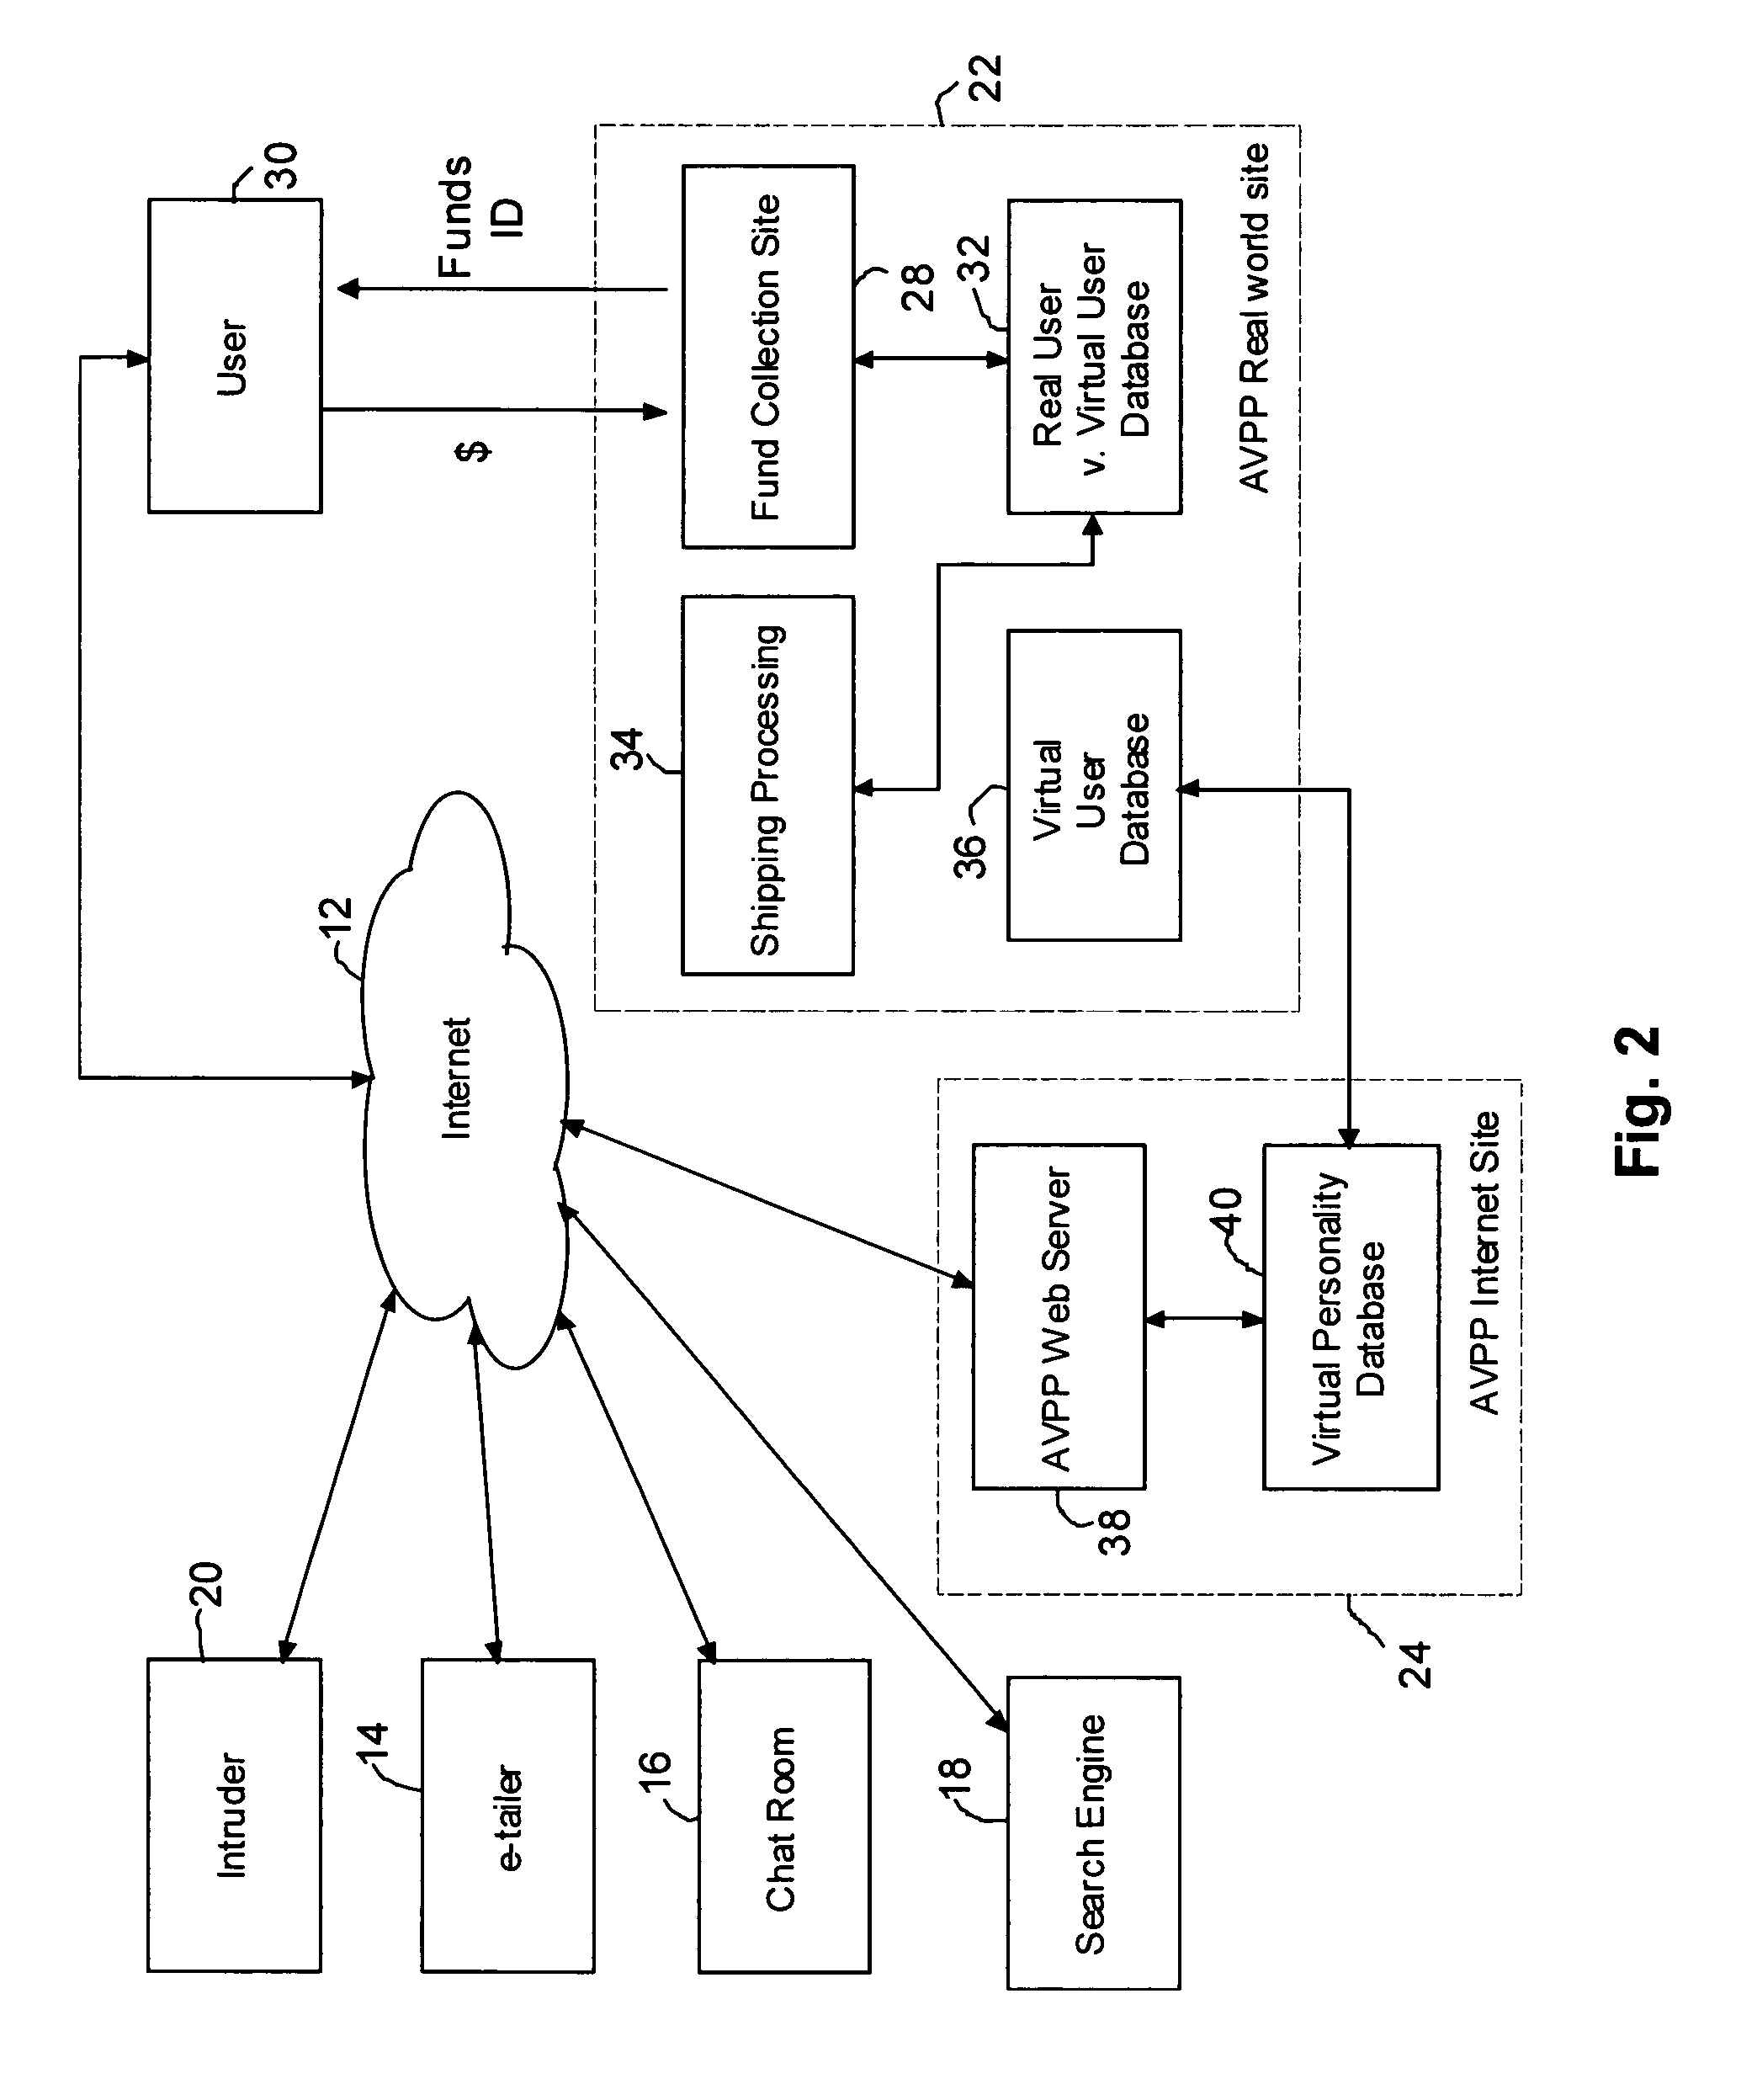 Method and system for securing user identities and creating virtual users to enhance privacy on a communication network